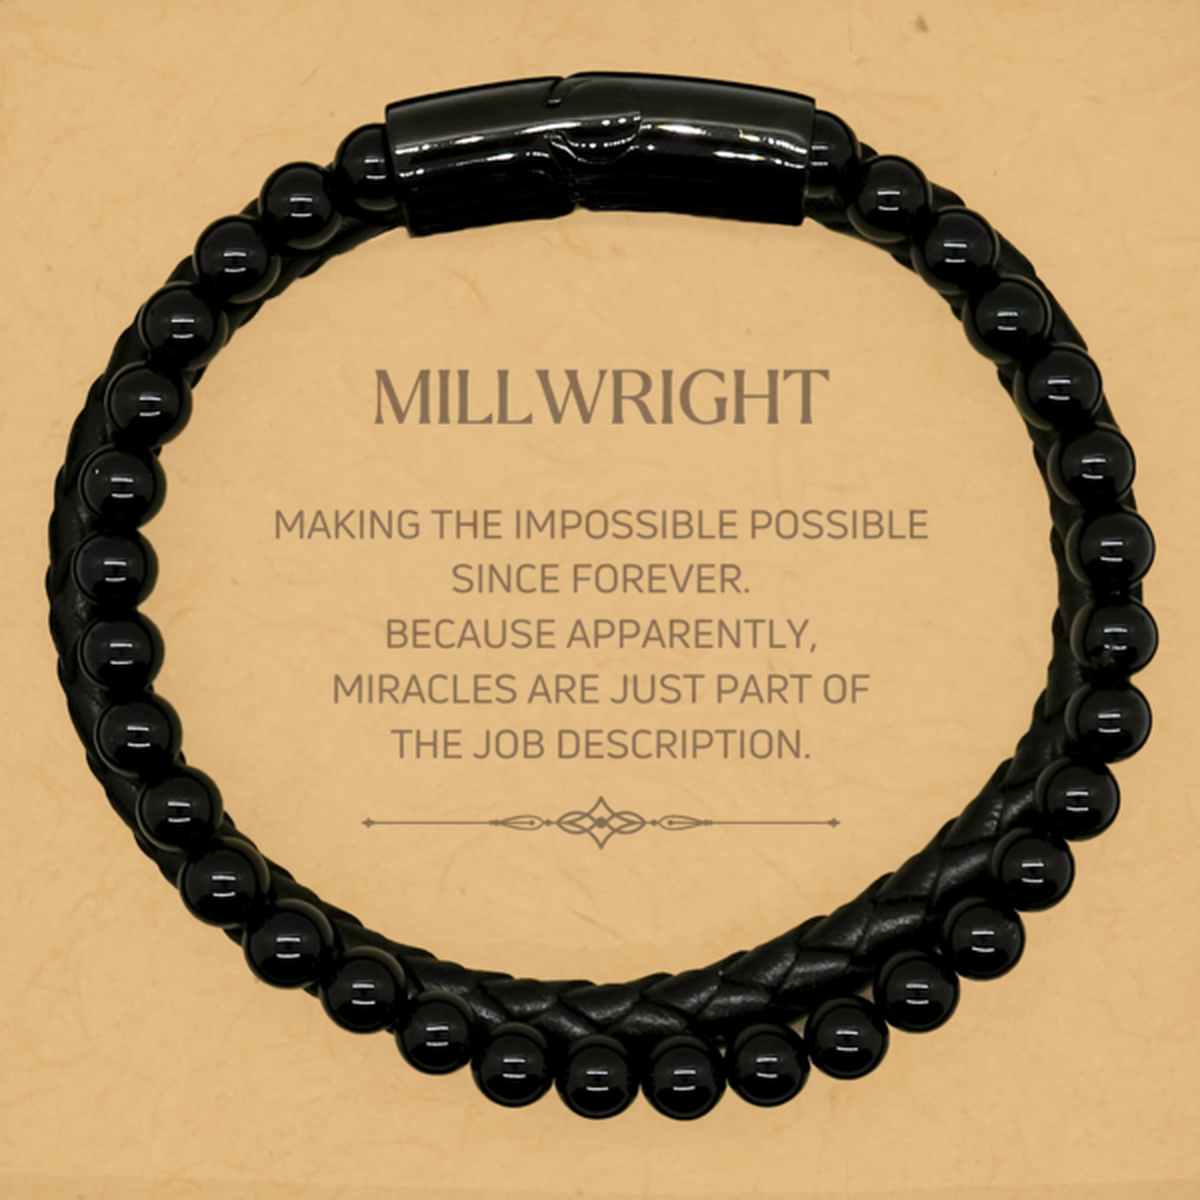 Funny Millwright Gifts, Miracles are just part of the job description, Inspirational Birthday Stone Leather Bracelets For Millwright, Men, Women, Coworkers, Friends, Boss